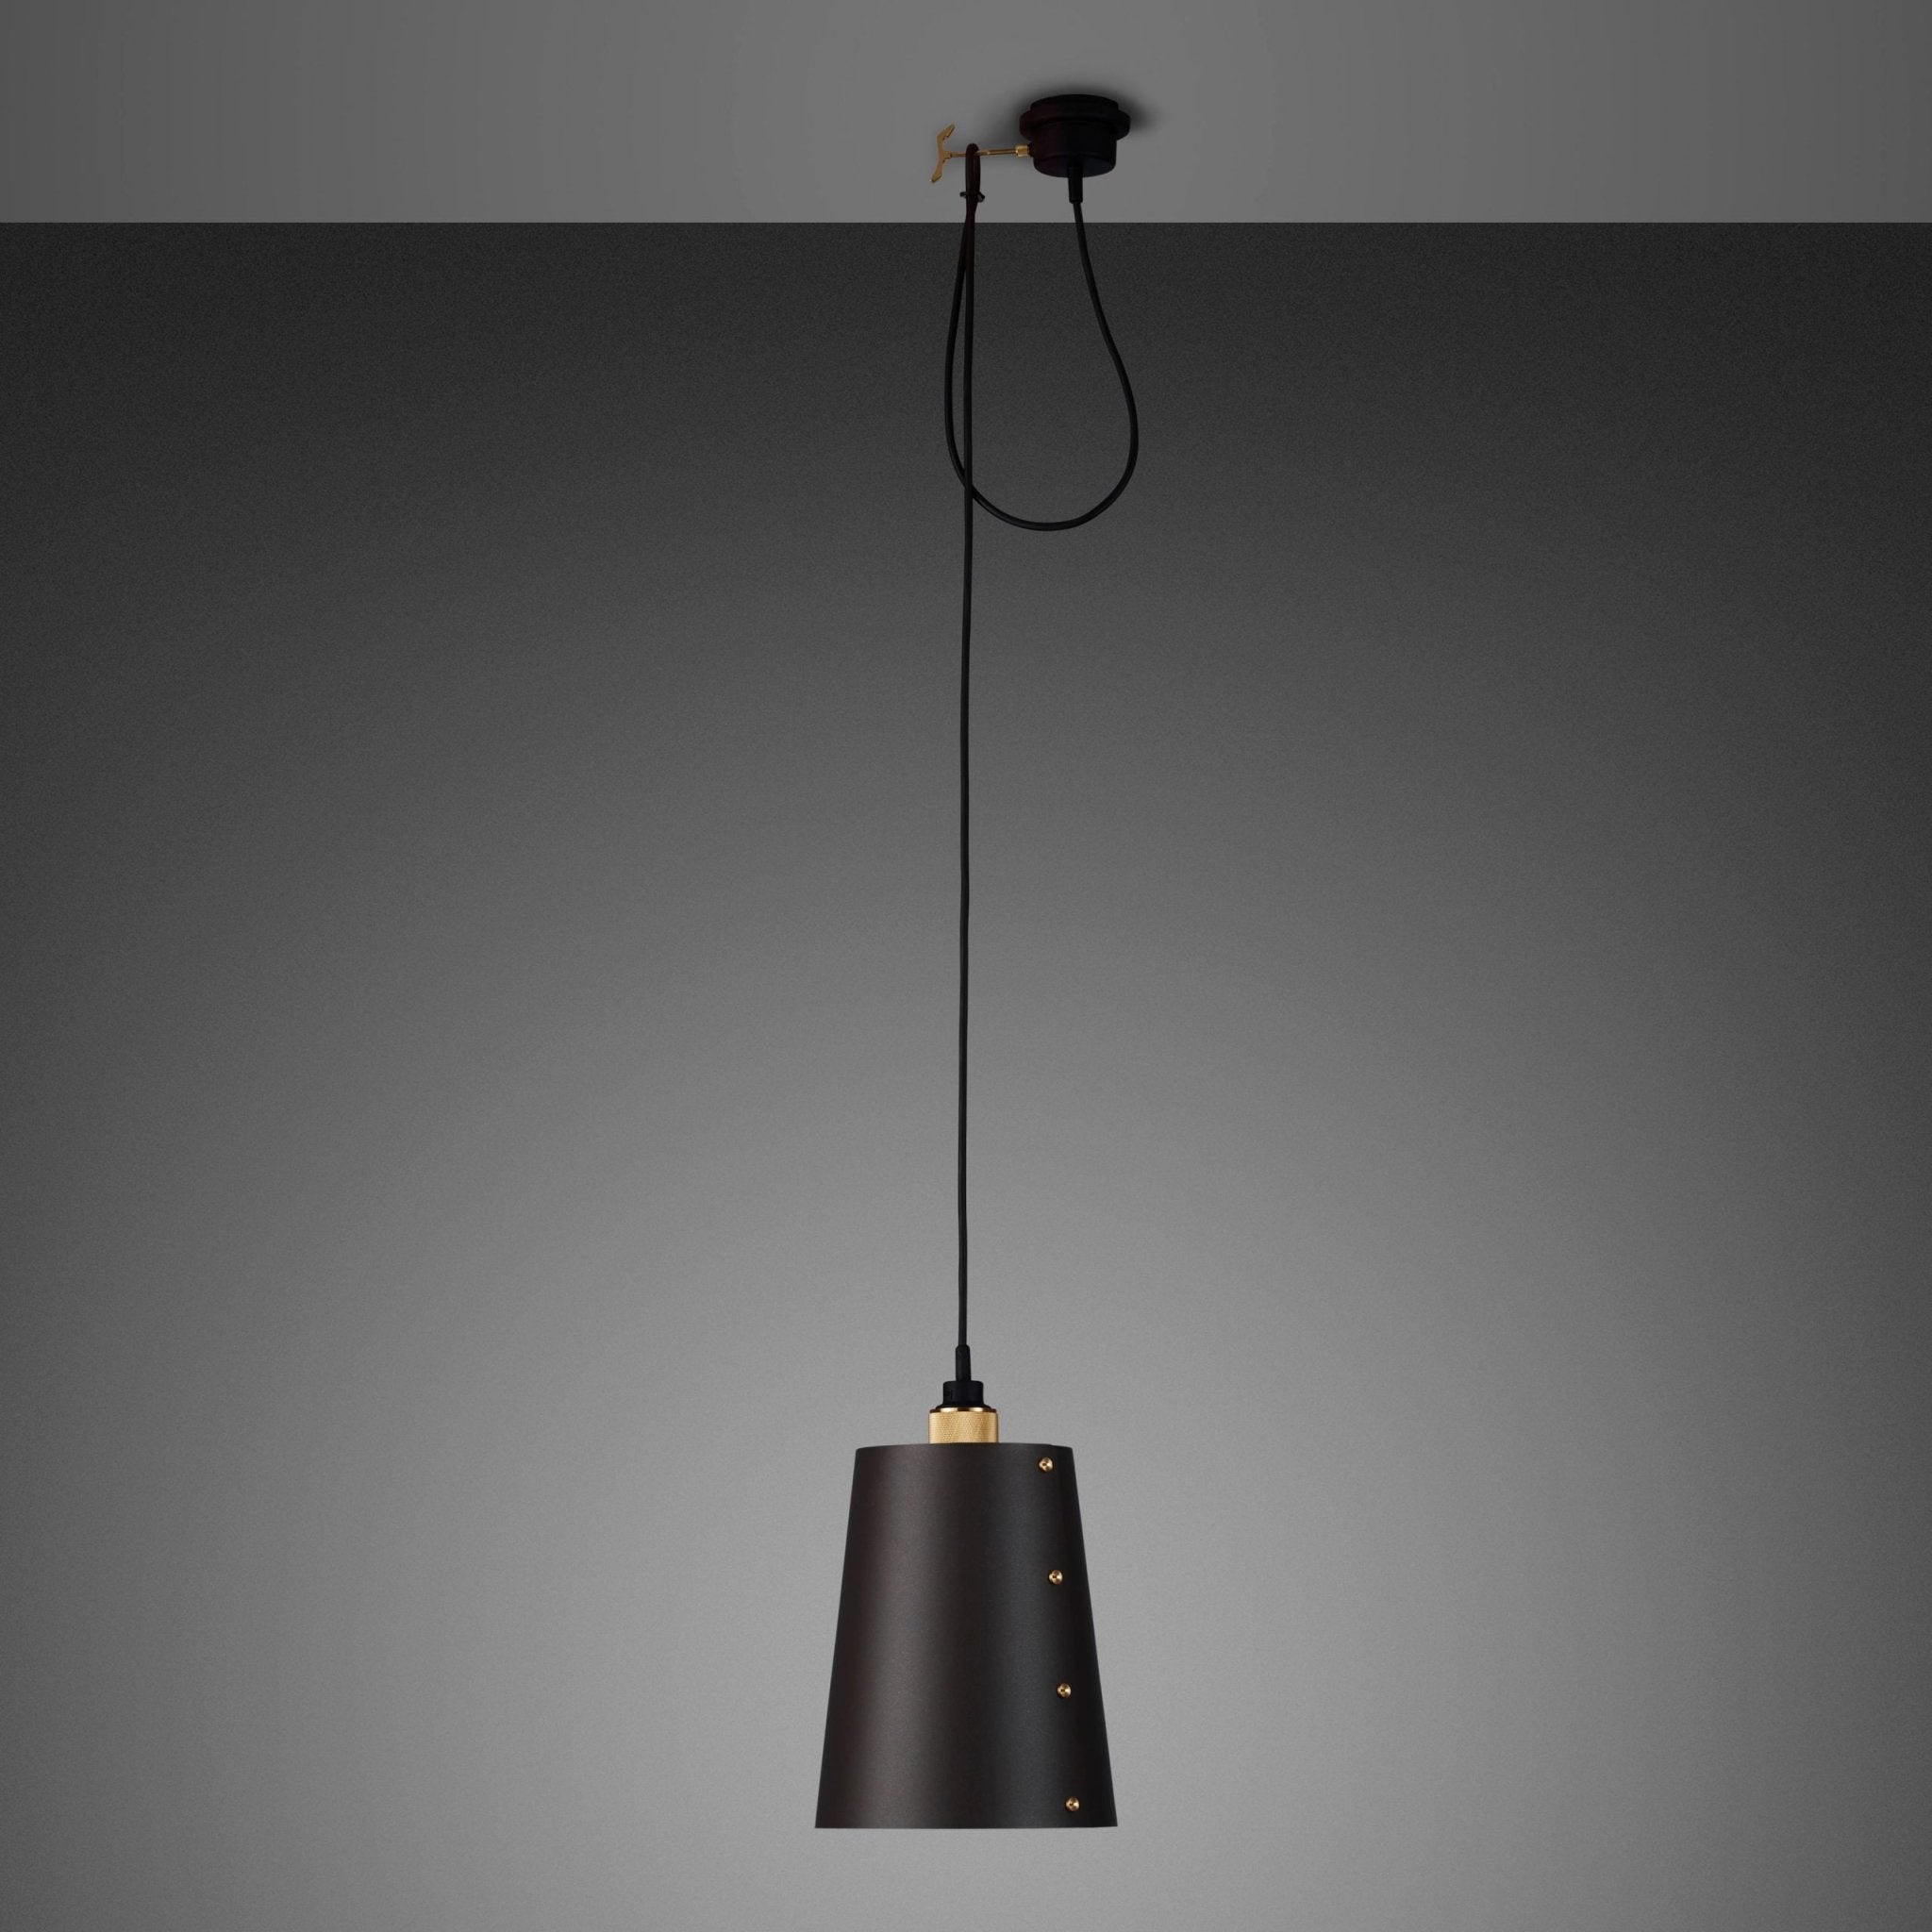 Buster and Punch - Hooked 1.0 / Groot Grafiet Shade 2.0m Hanglamp - KOOT